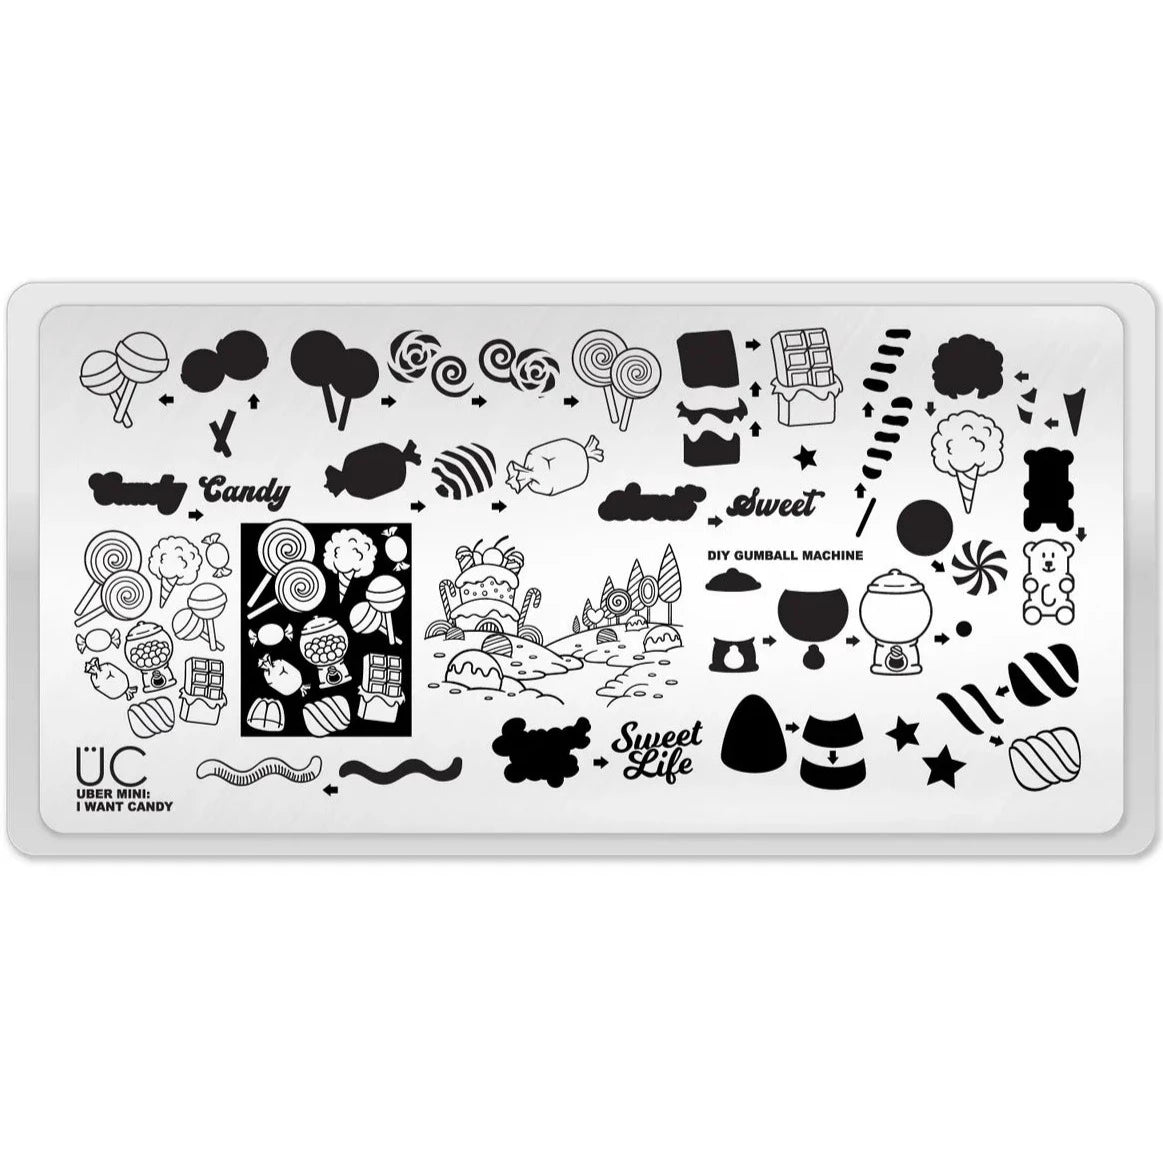 I Want Candy - Stamping Plate